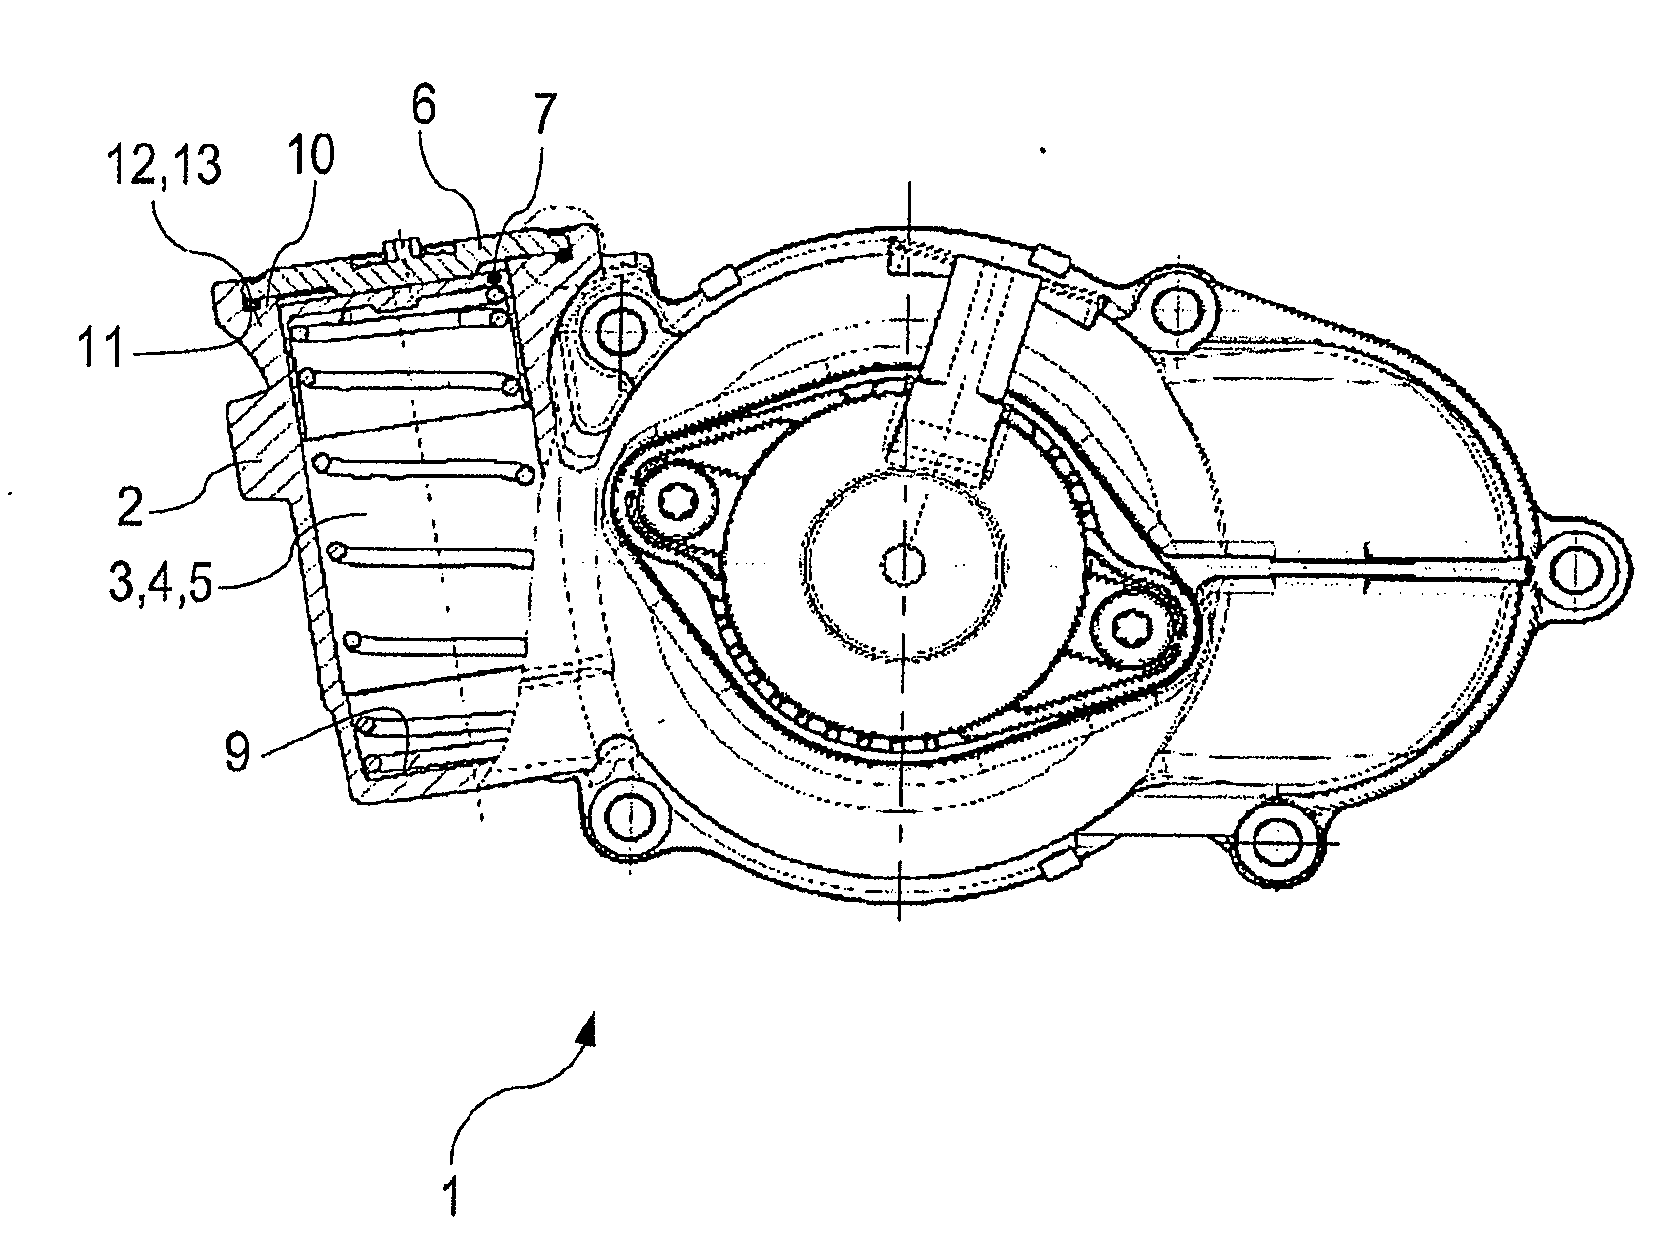 Housing bell with integrated pressure accumulator having a flanged cover